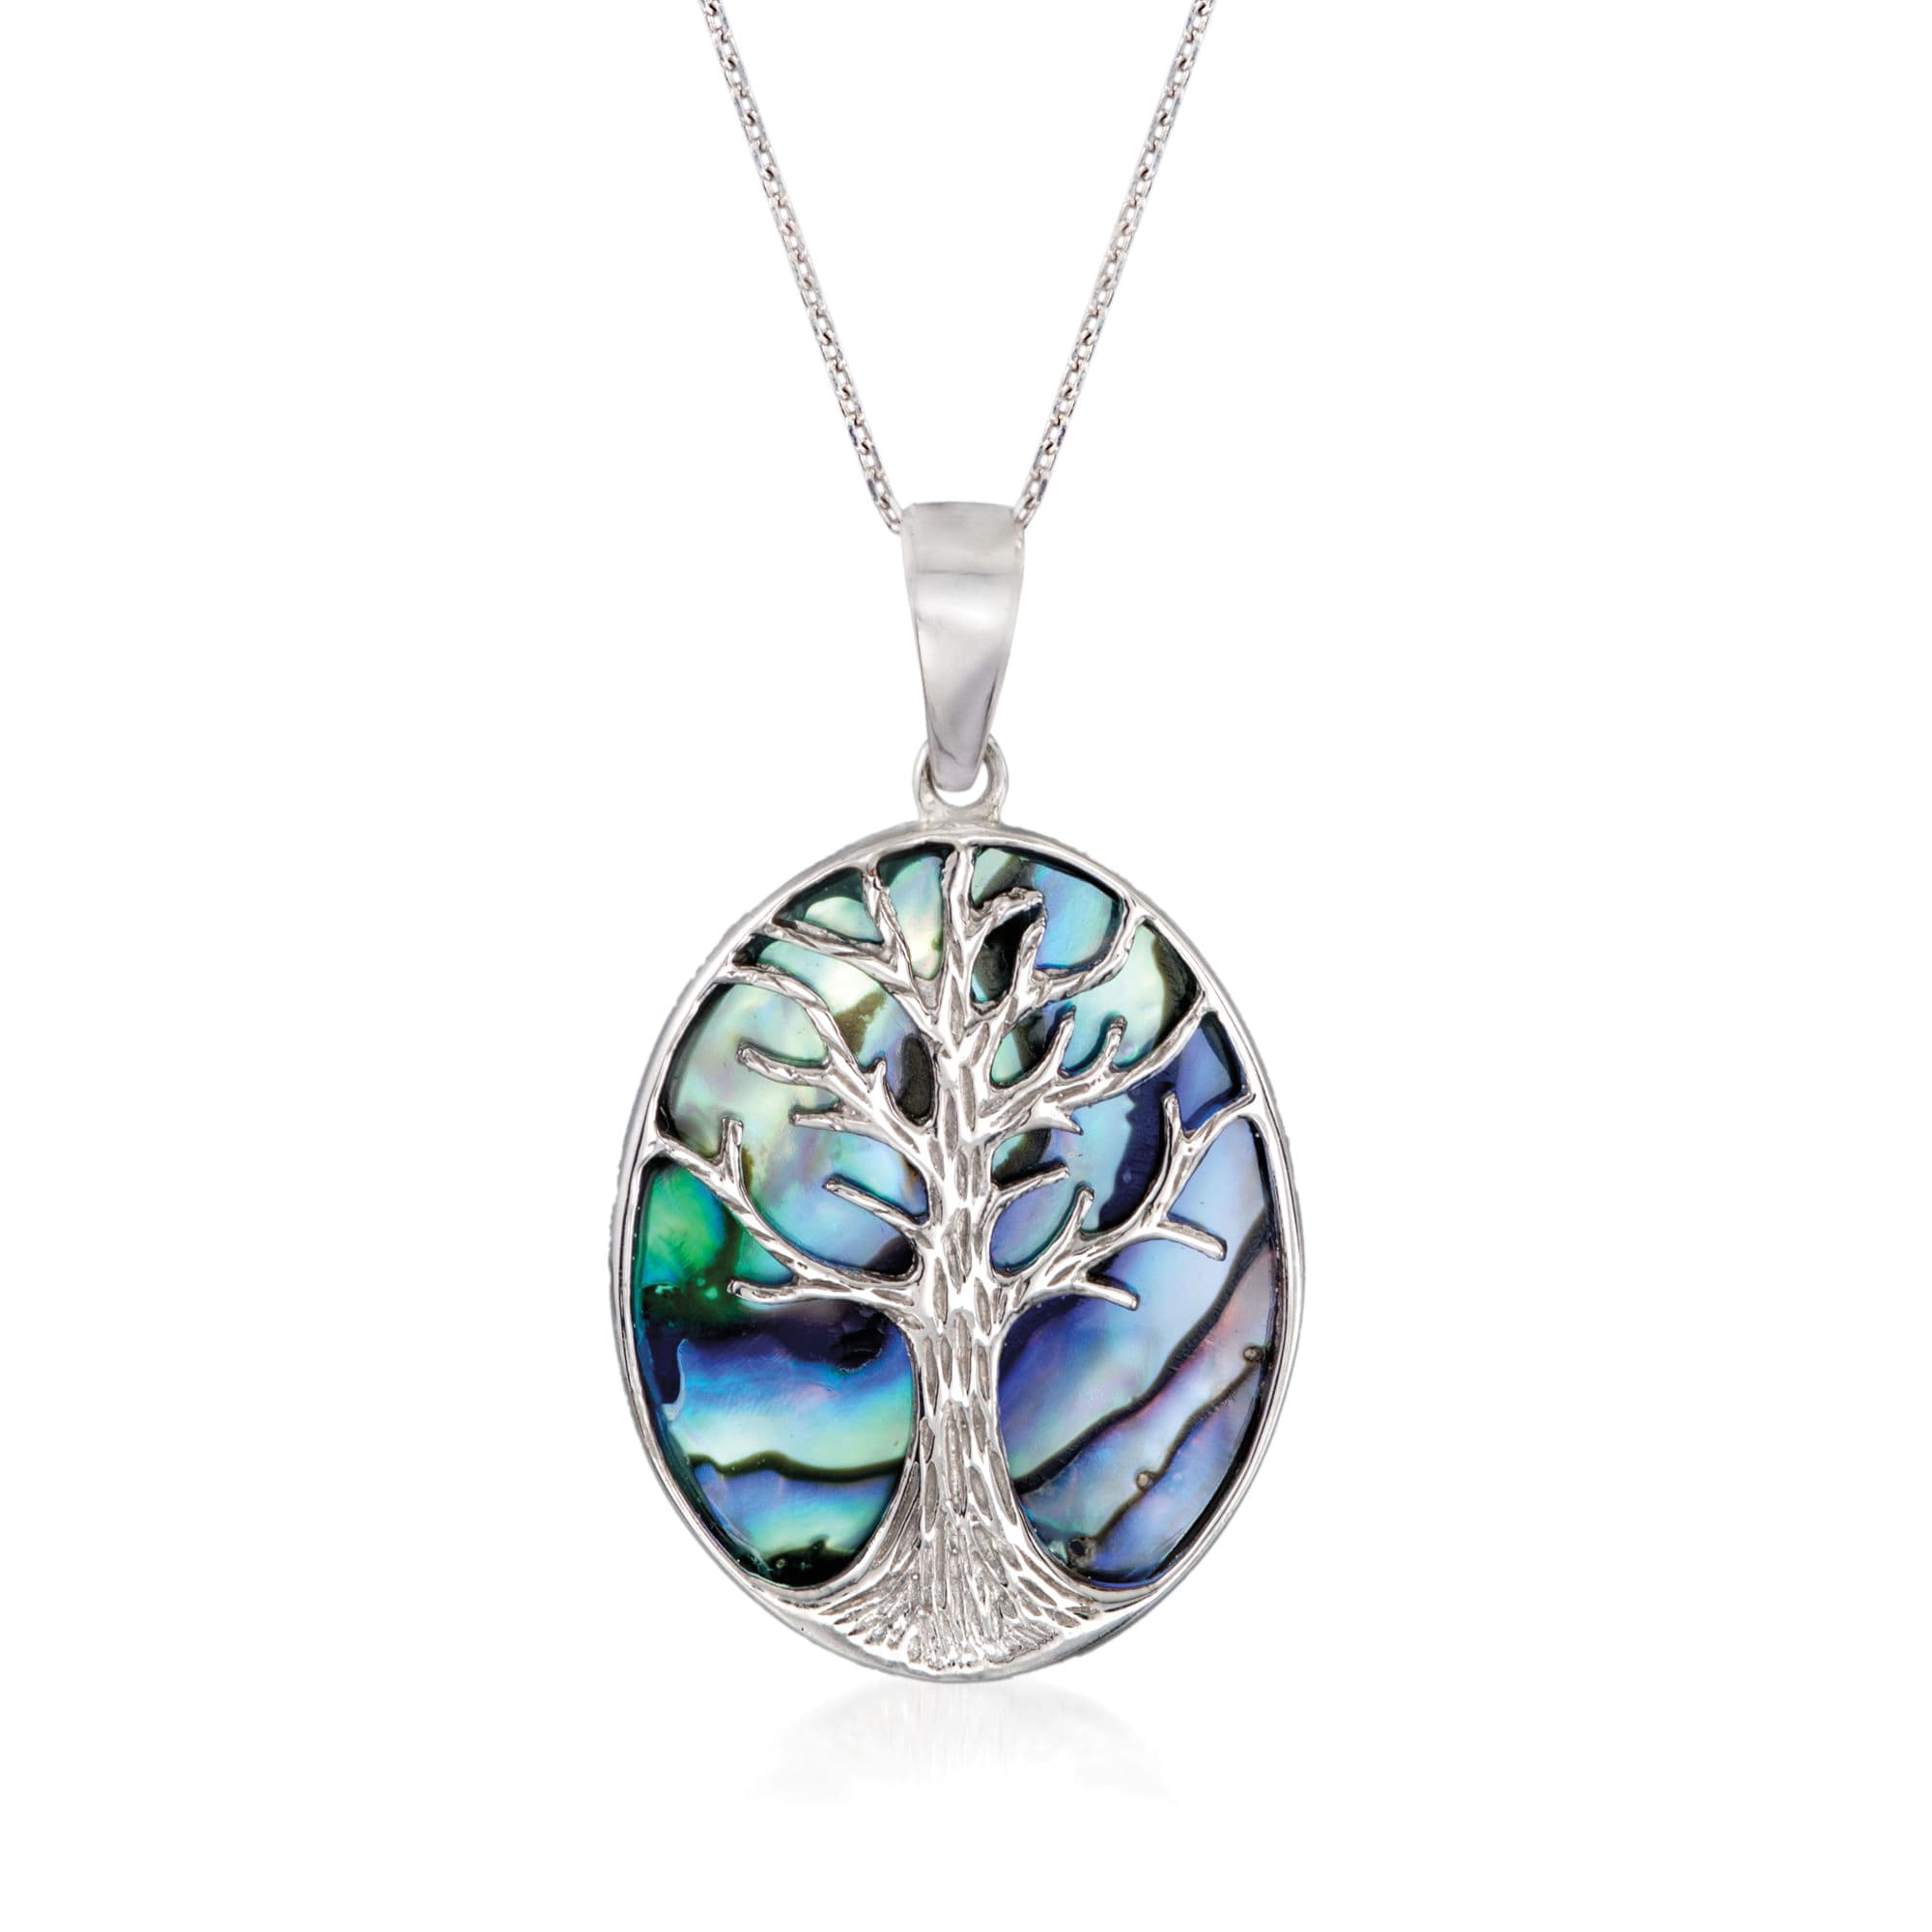 Abalone Shell Tree of Life Pendant Necklace in Sterling Silver. 18